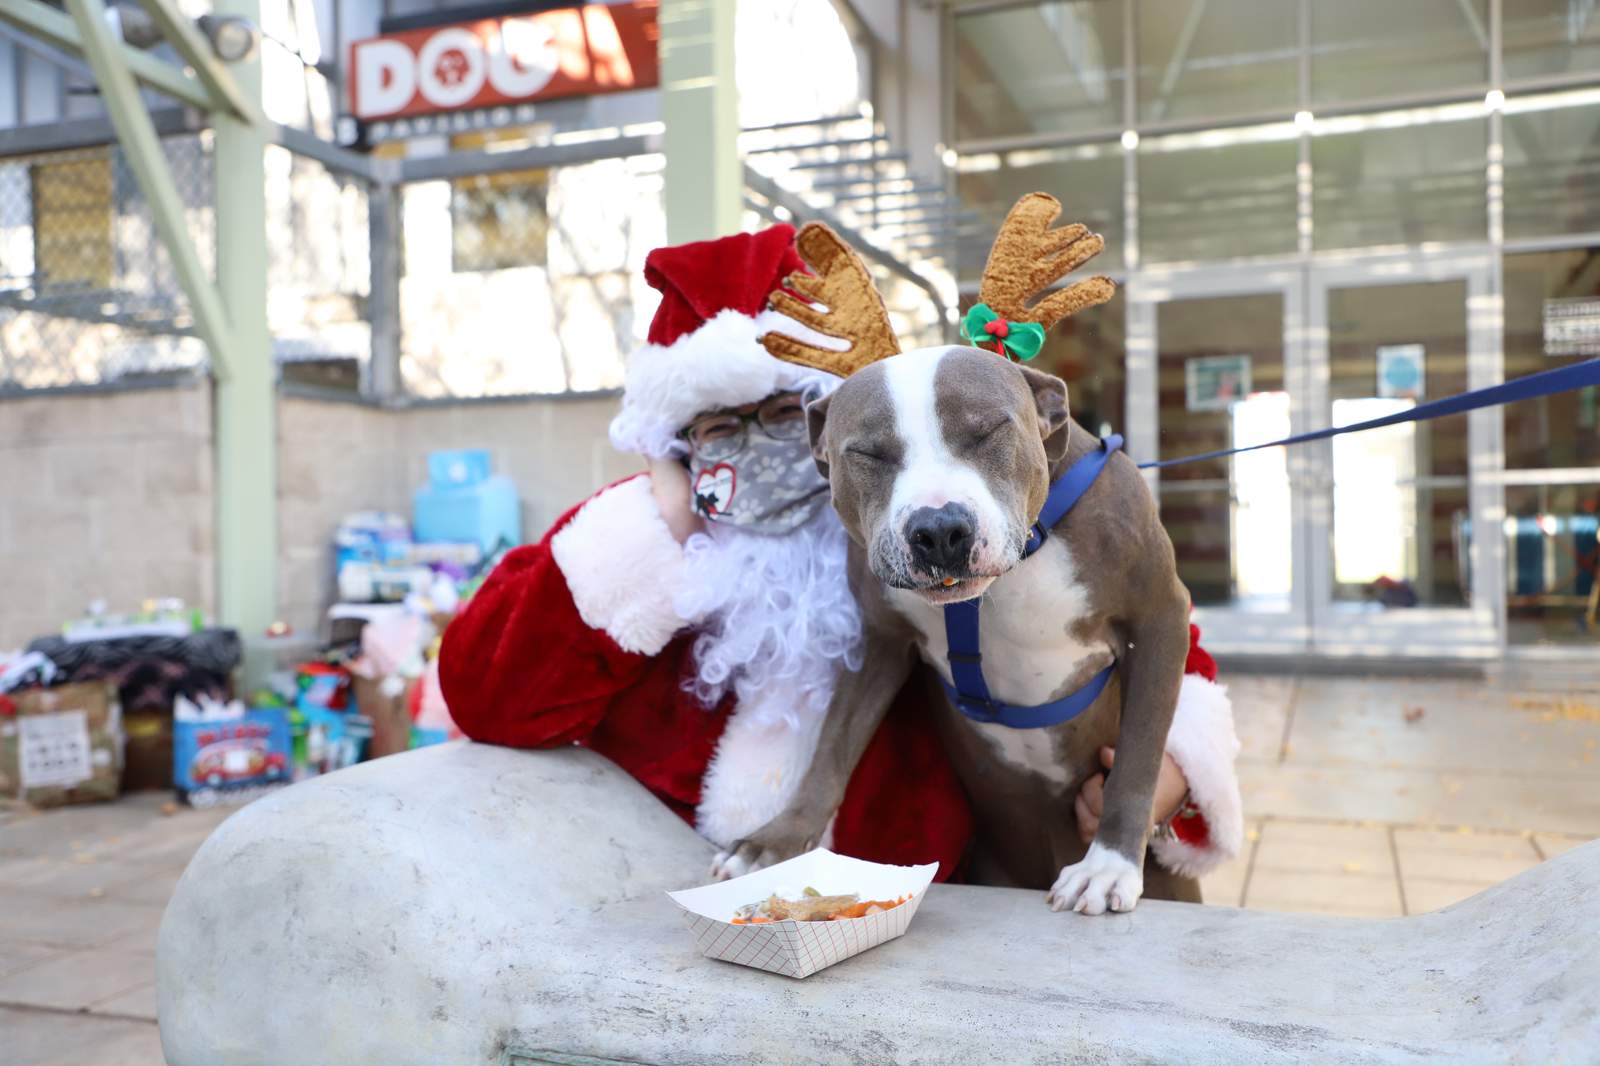 WATCH: These shelter pets got a special holiday meal, visit from Santa